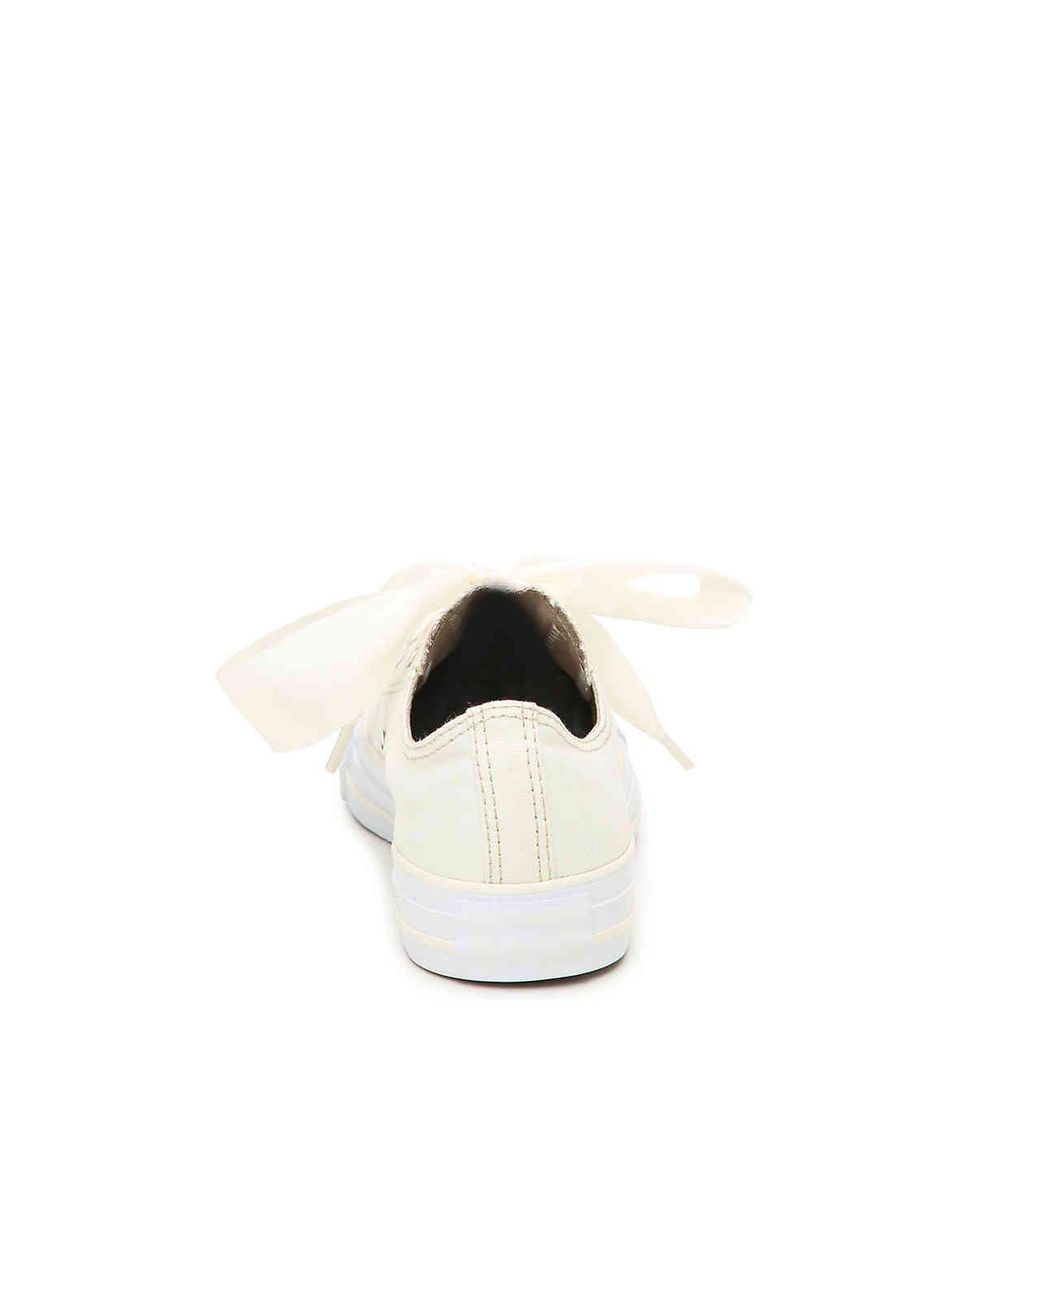 Converse Satin Chuck Taylor All Star Egret Ribbon Sneaker in White | Lyst